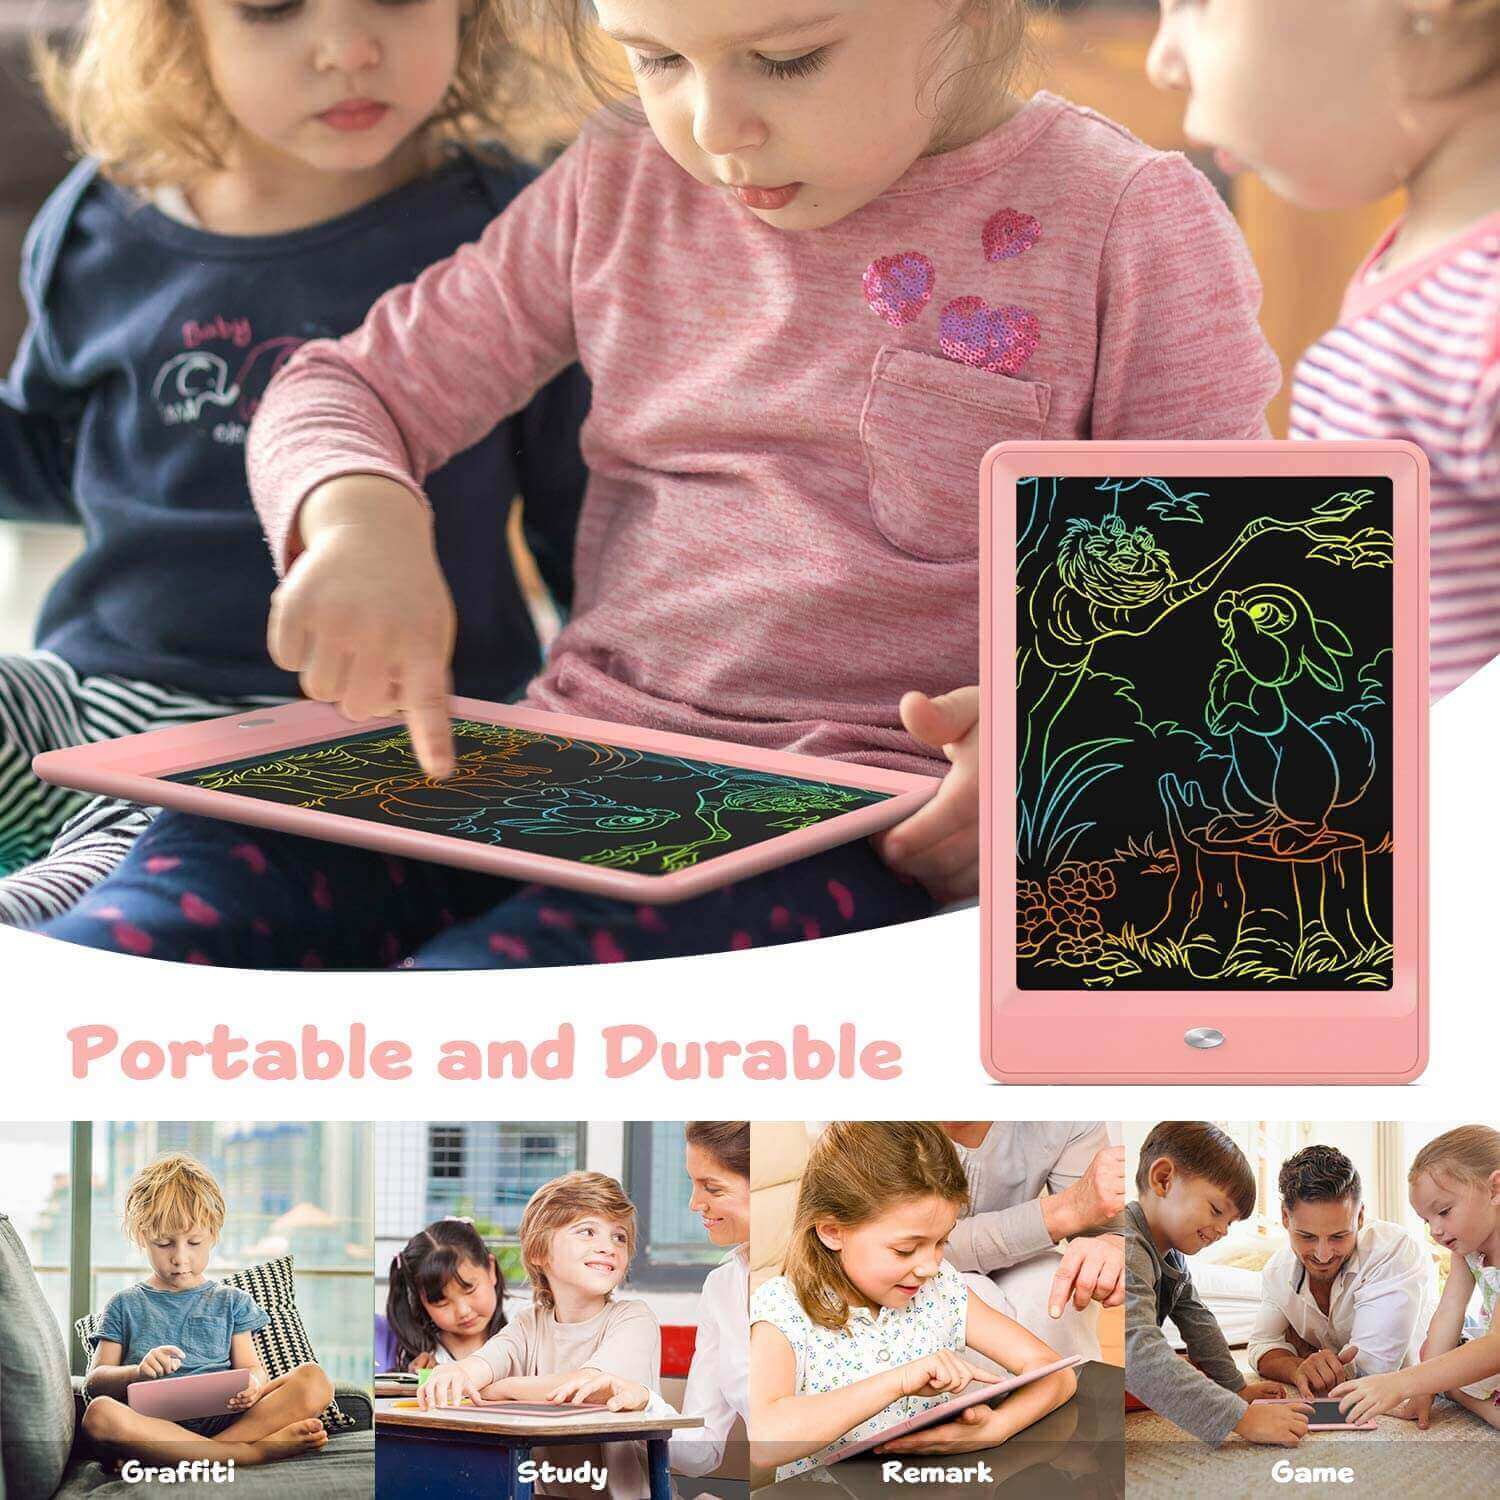 Dinosaur Toys for Kids 10 Inch LCD Writing Tablet Doodle Board Drawing -  Bravokidstoys